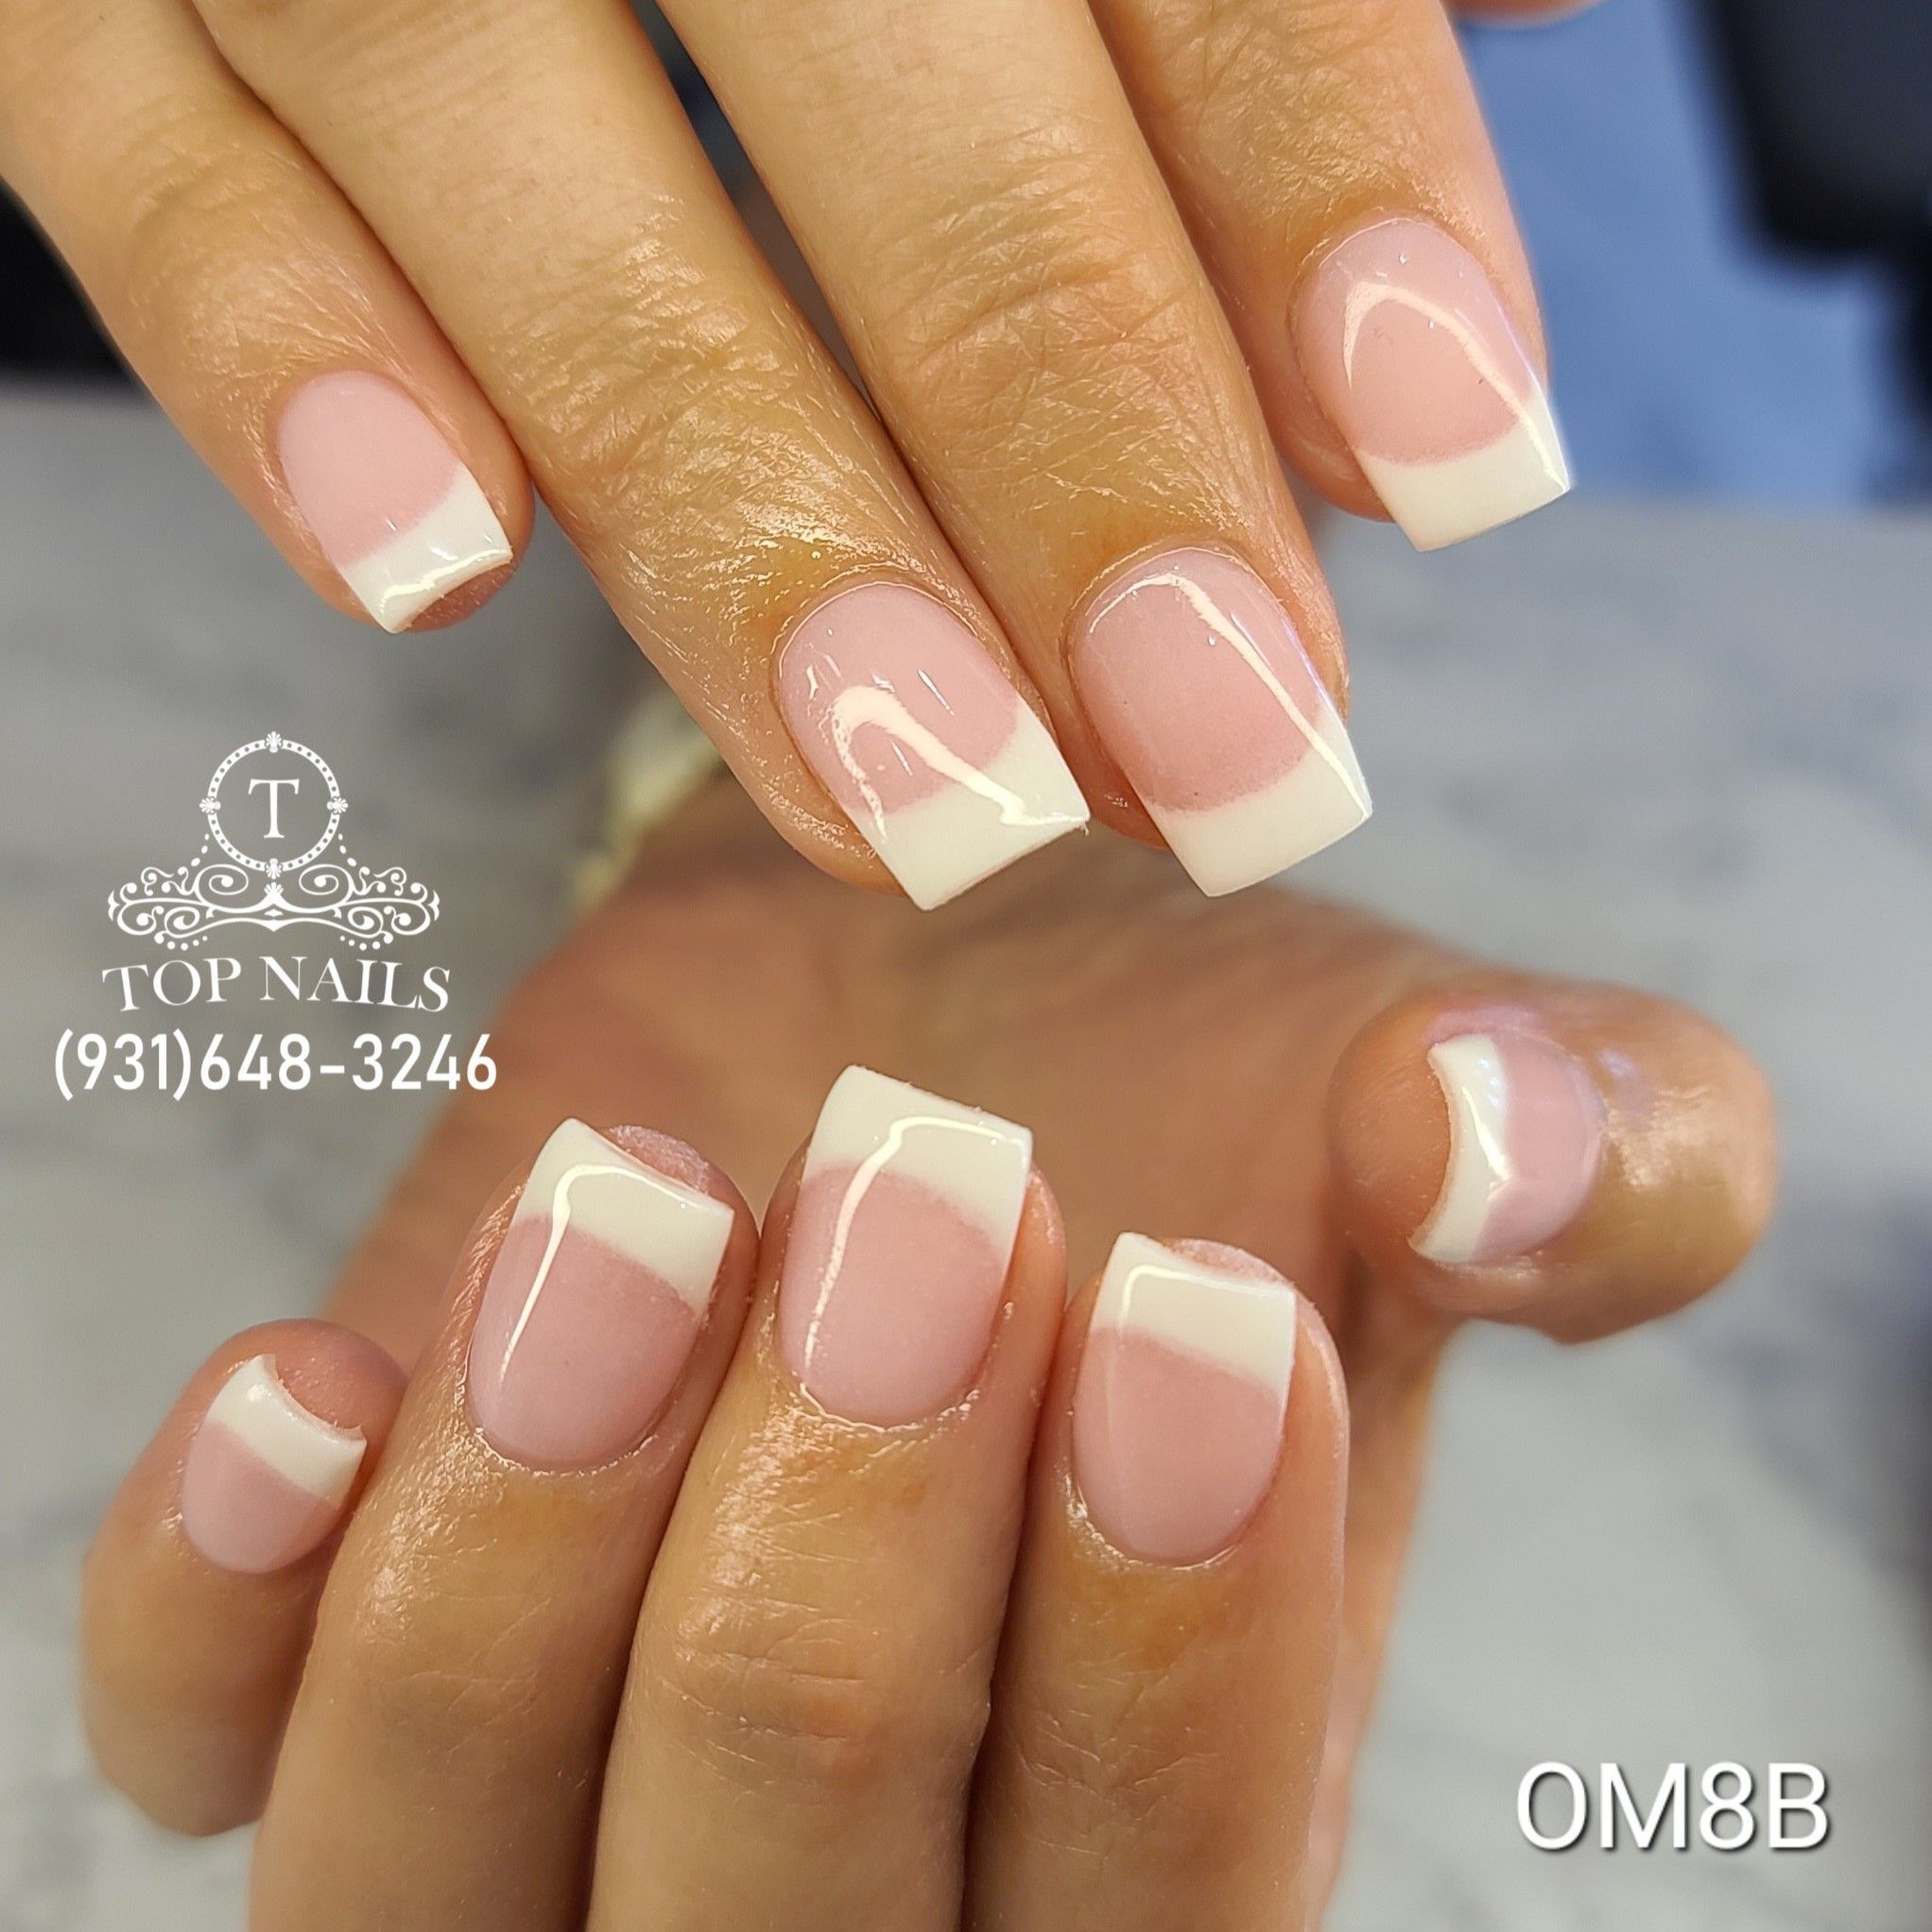 SOAK OFF + Dip French or Ombre on Natural Nails portfolio